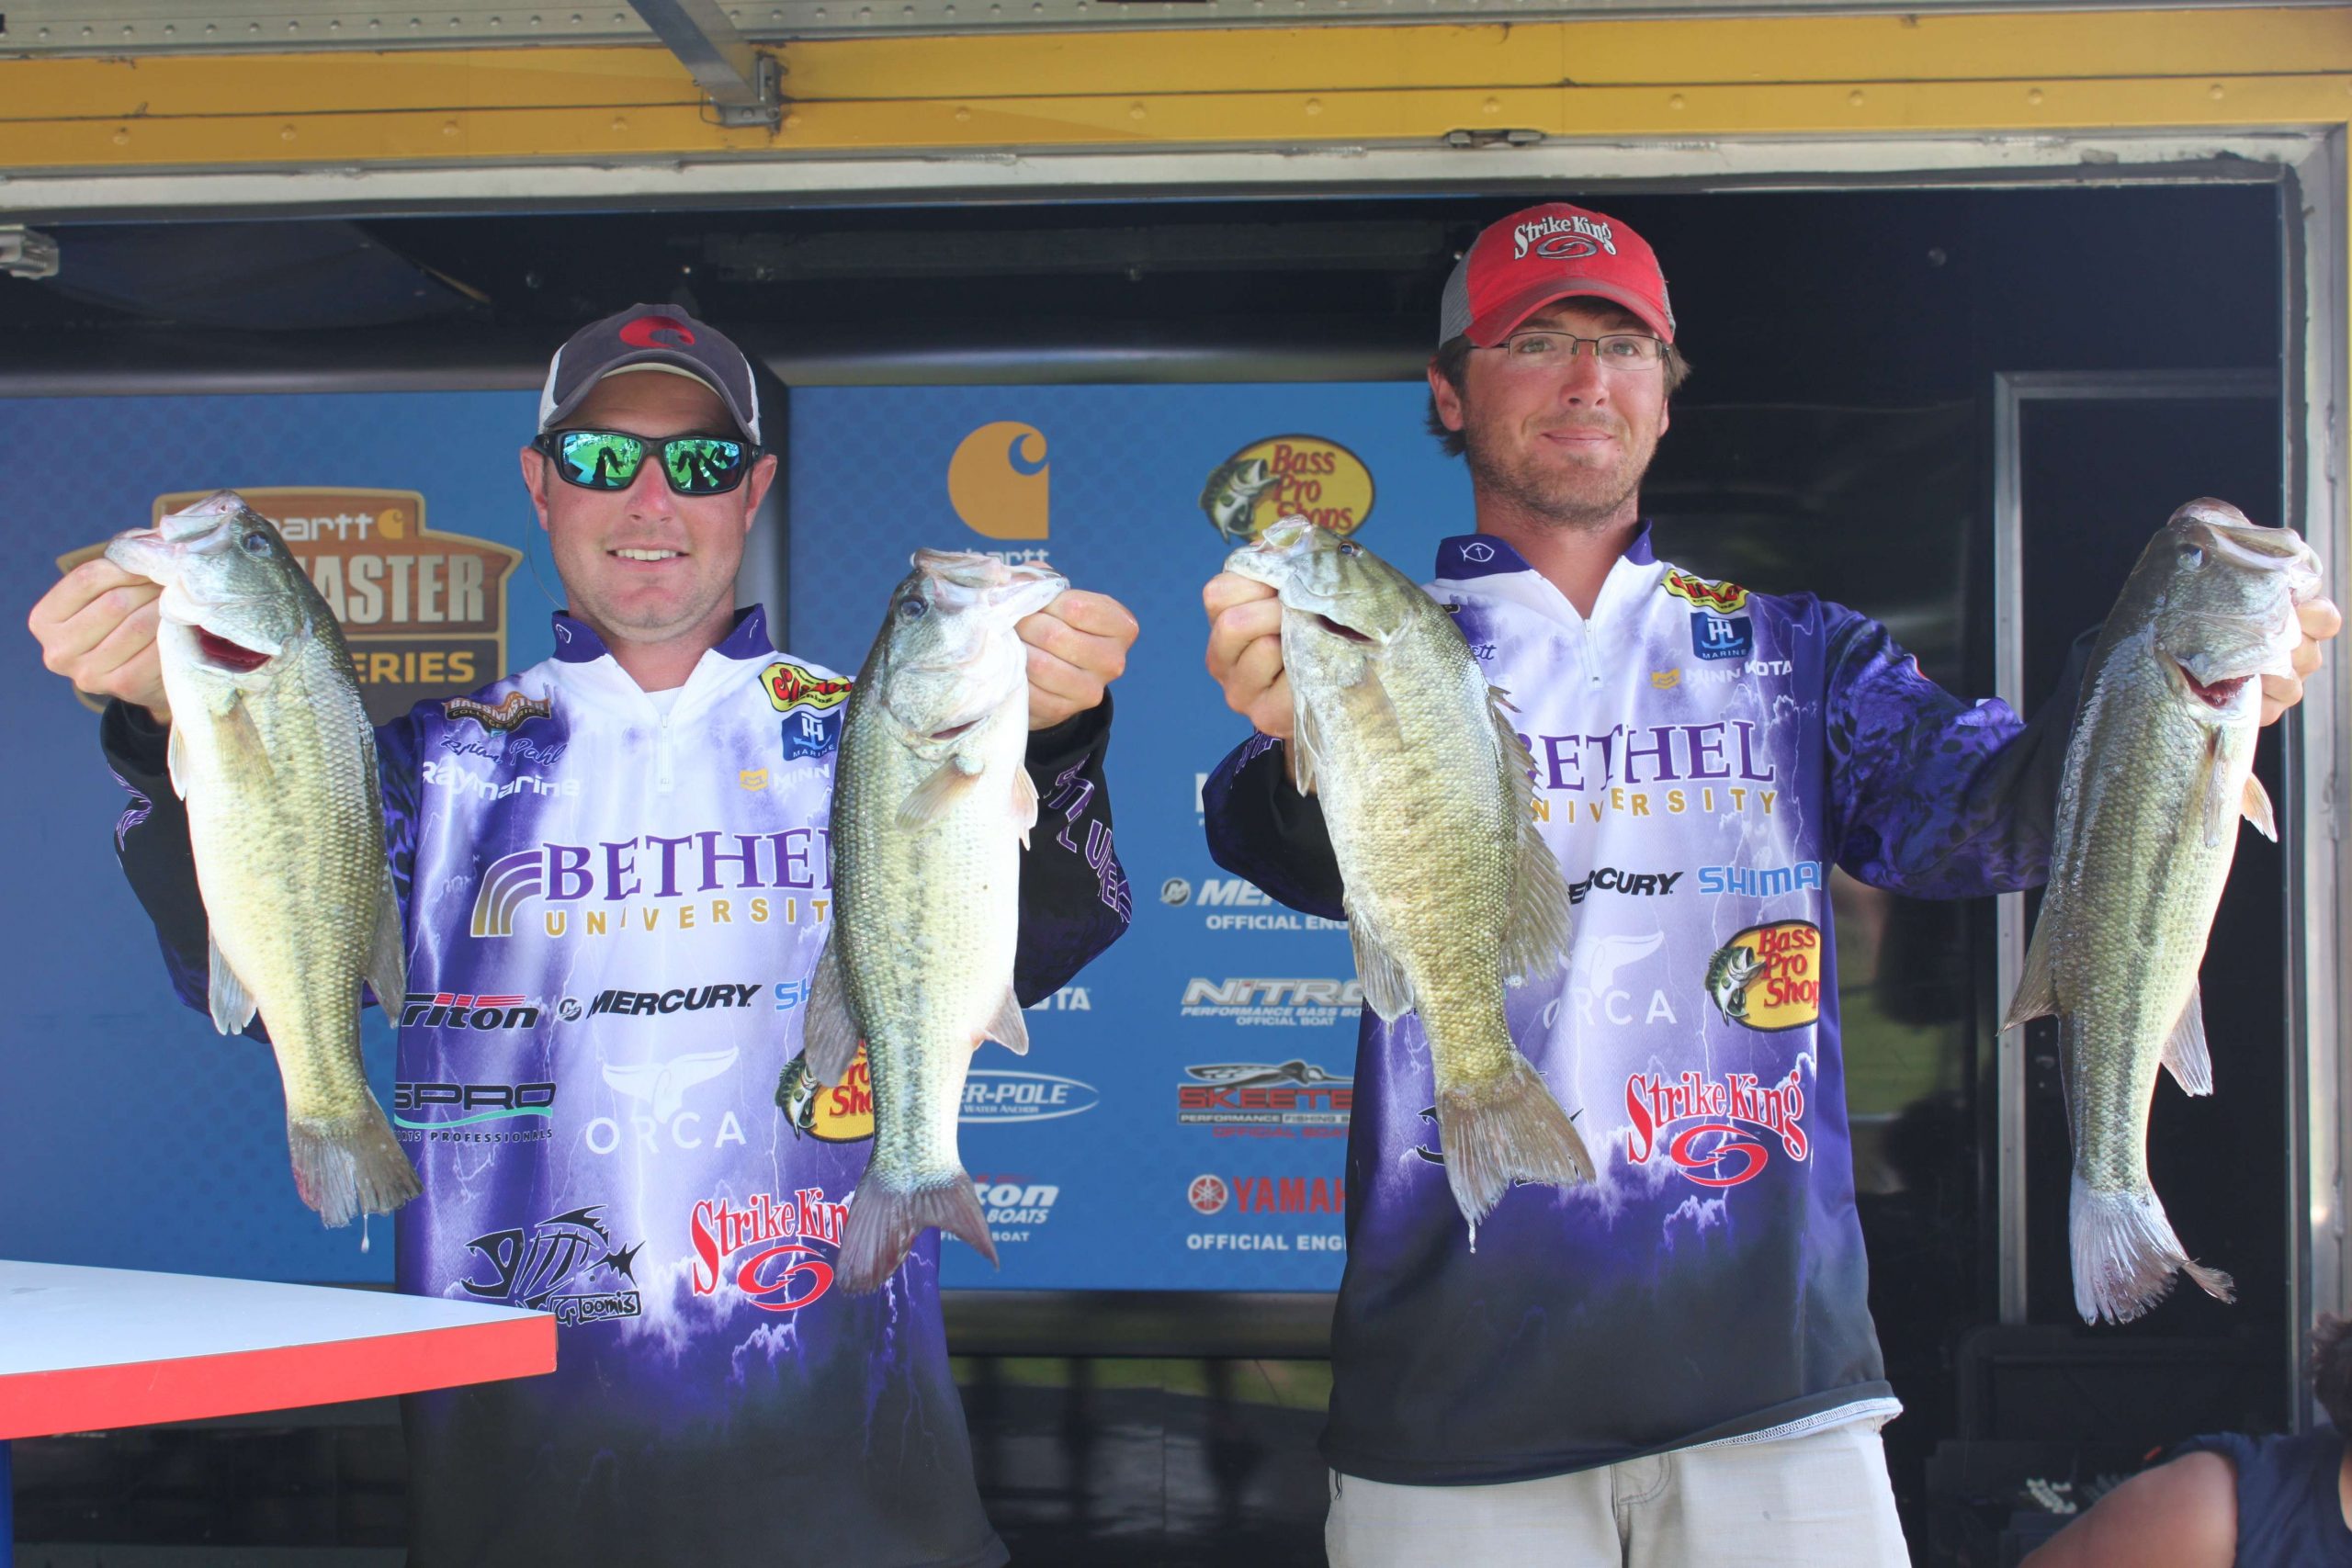 Brian Pahl and John Garrett of Bethel University are in eighth place with 26-8.